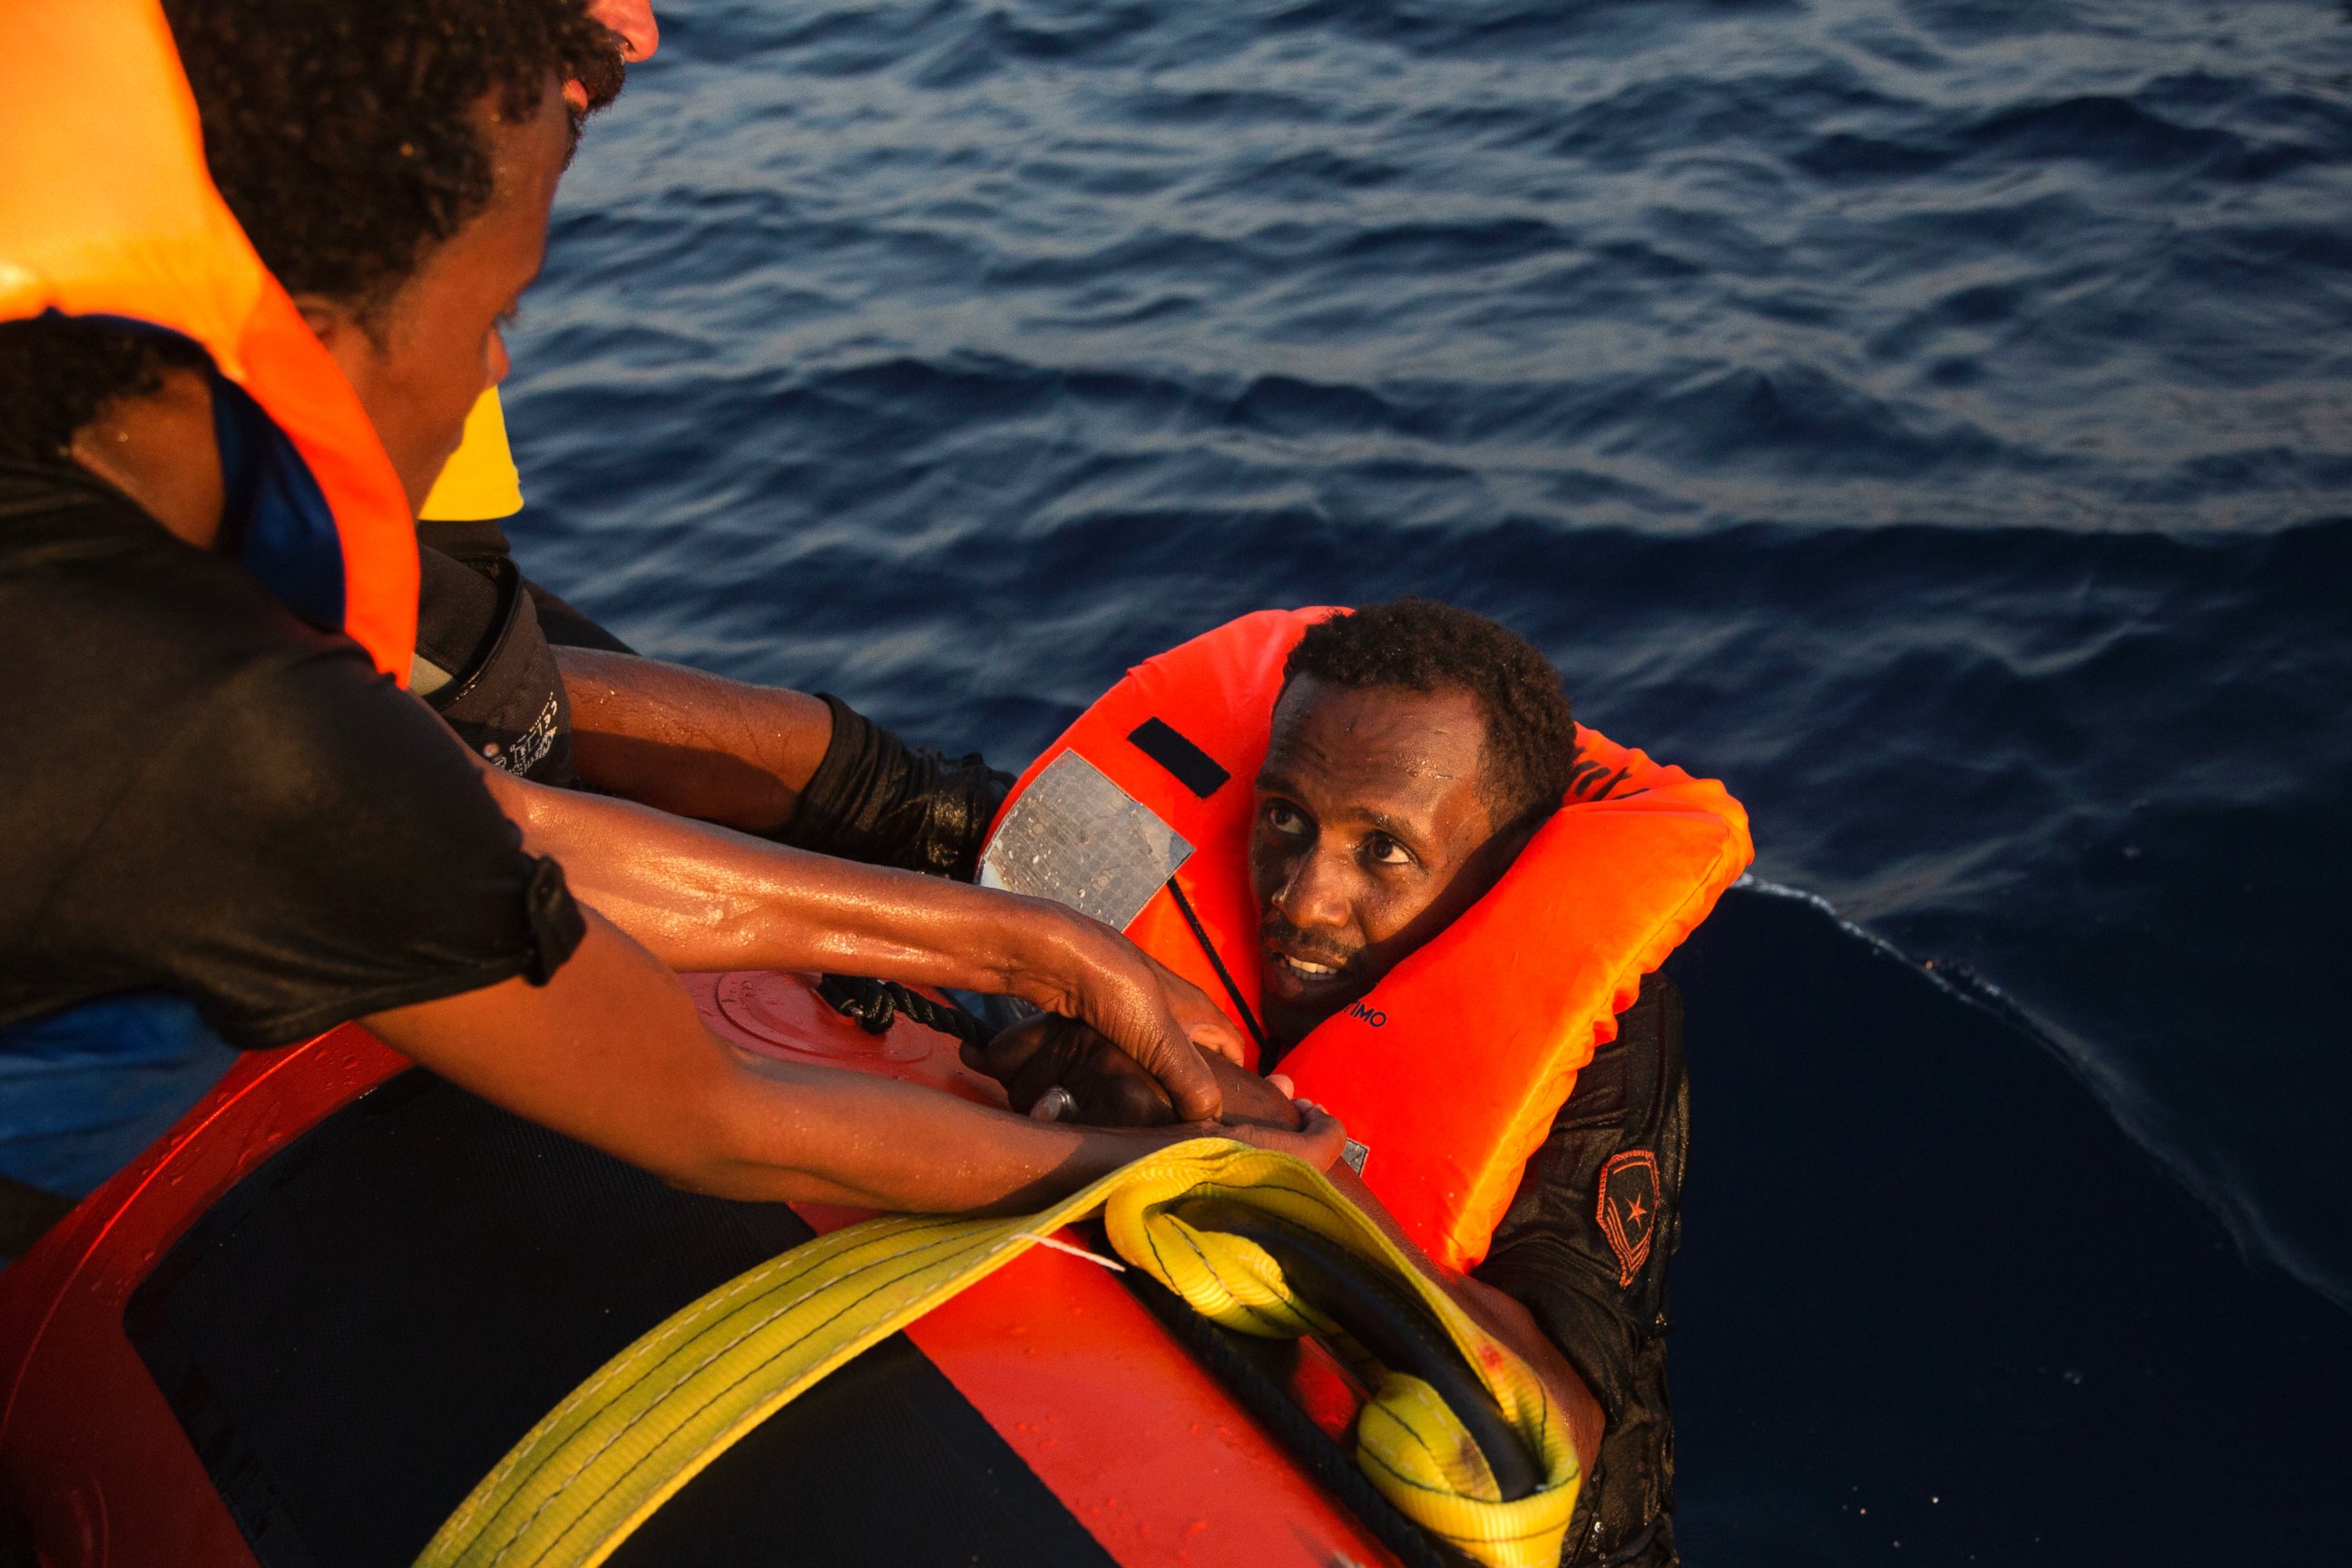 PHOTO: A migrant from Eritrea is helped after jumping into the water from a crowded wooden boat during a rescue operation in the Mediterranean sea, Aug. 29, 2016.